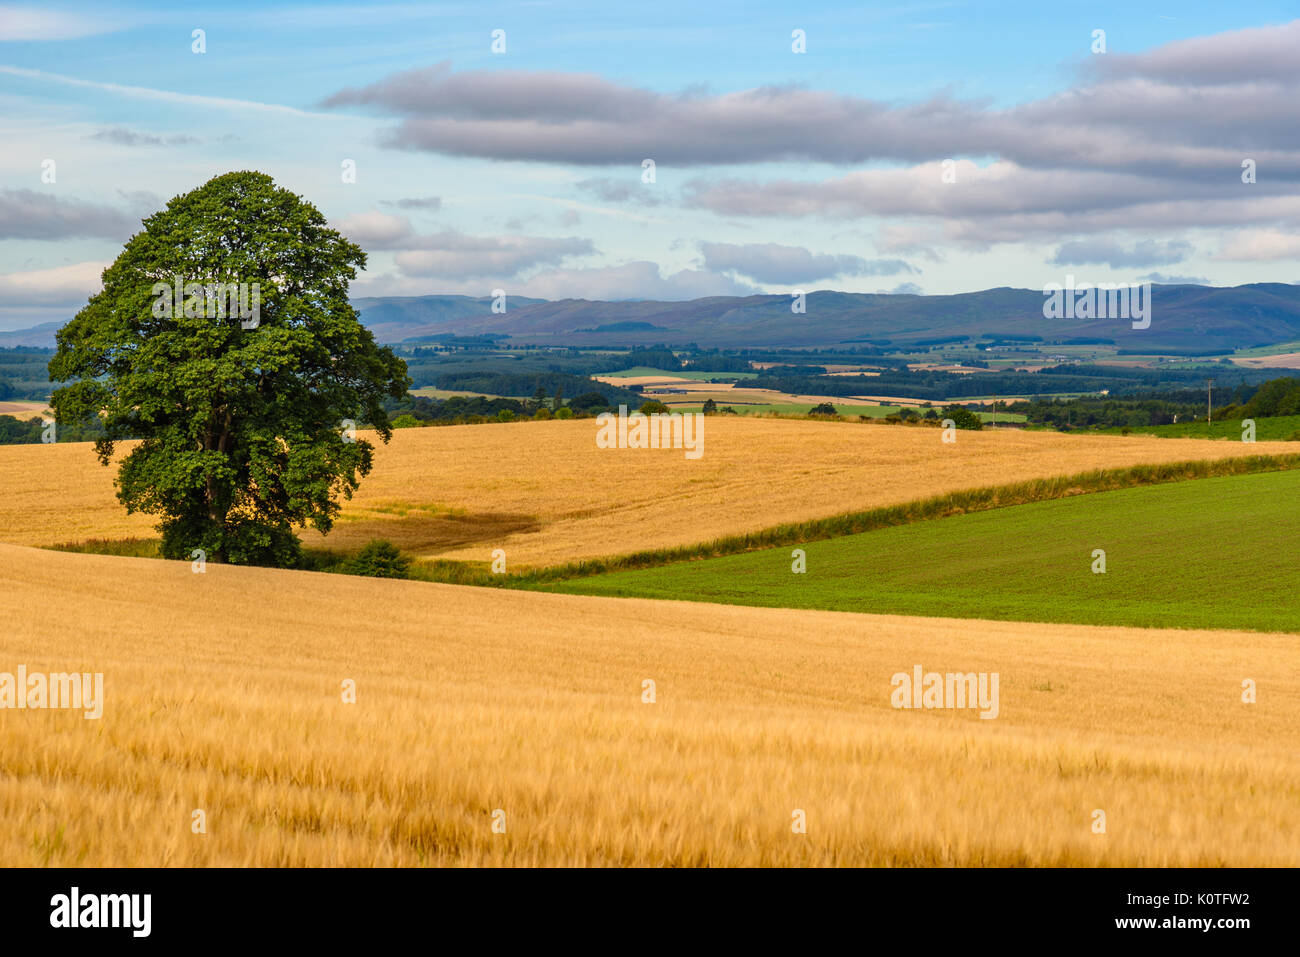 Scenic view of the countryside near Perth in Scotland in summer with a tree in the middle of a mature wheat field. Stock Photo